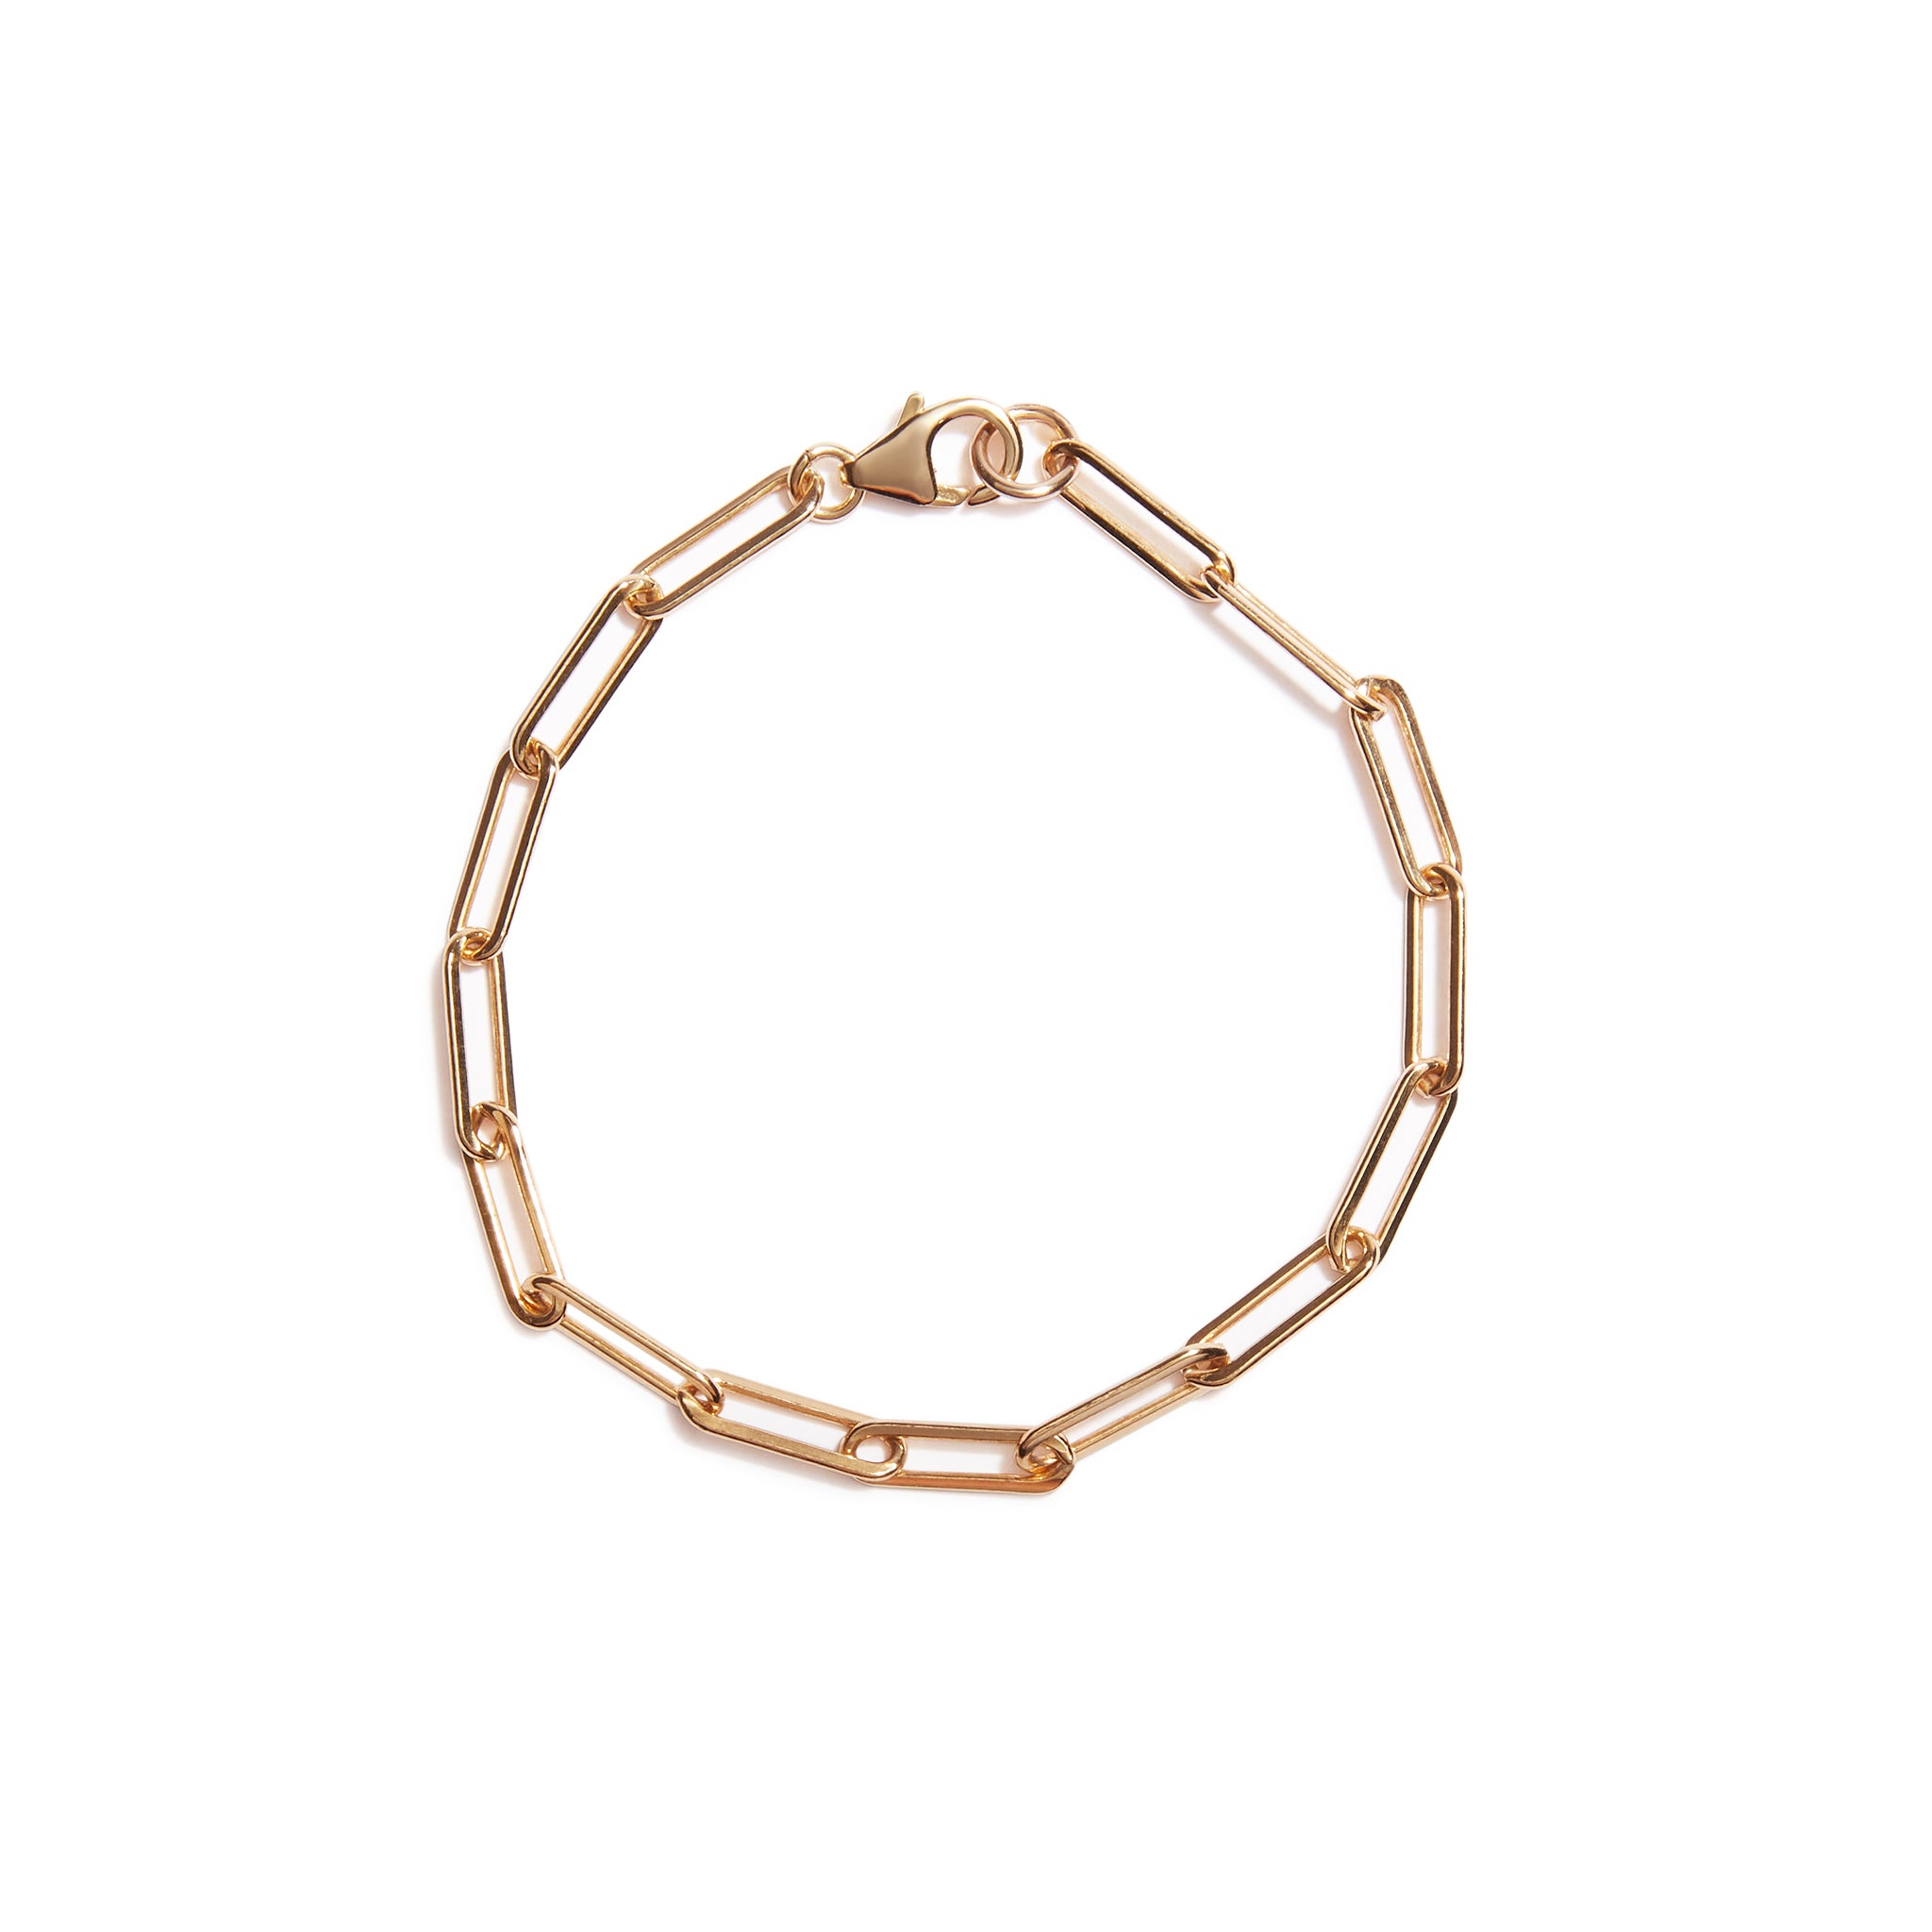 A shinny gold link bracelet made from 14ct gold fill, adding a touch of elegance to any outfit.